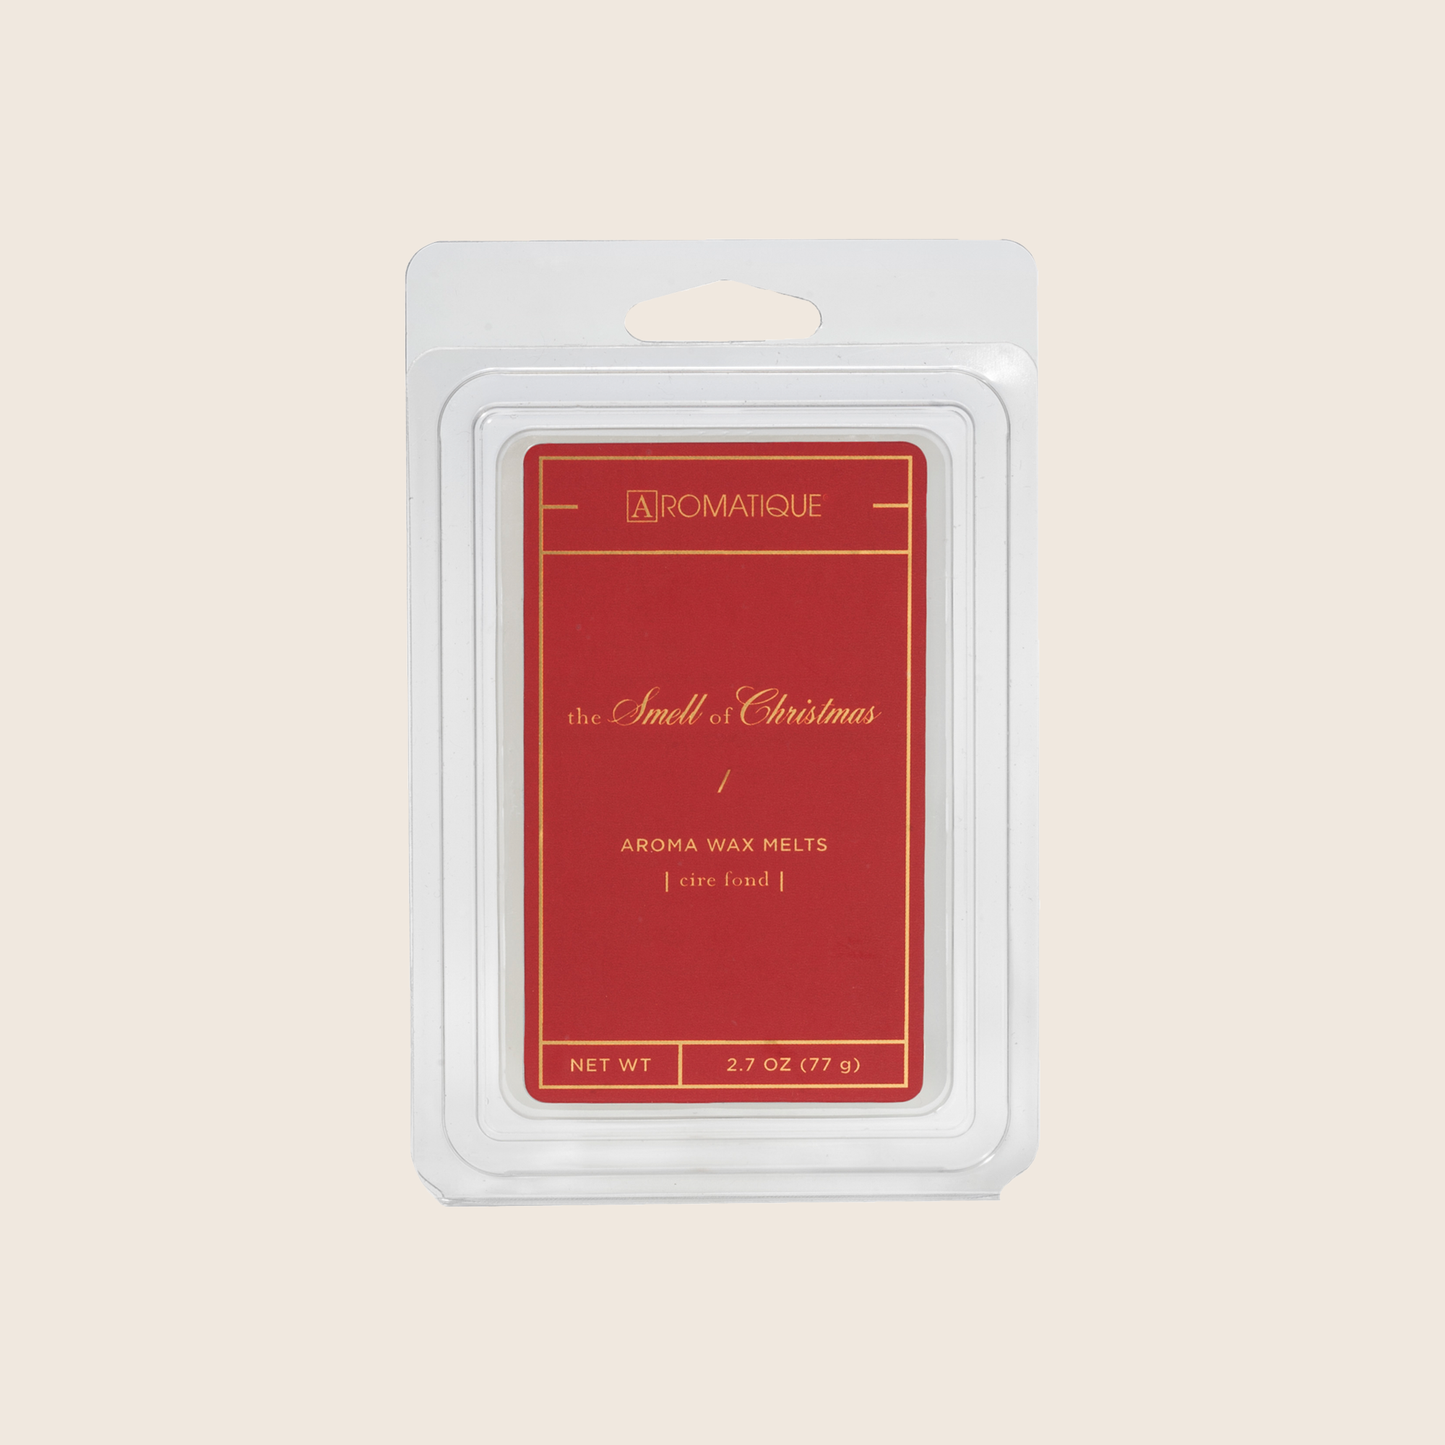 Load image into Gallery viewer, The Smell of Christmas® is our signature fragrance with captivating citrus and spice with a warm blend of natural botanicals. The Smell Of Christmas® Aroma Wax Melts contain a set of 8 cubes made from 100% food-grade paraffin wax and a highly fragrant aroma - no wicks or flames needed.
